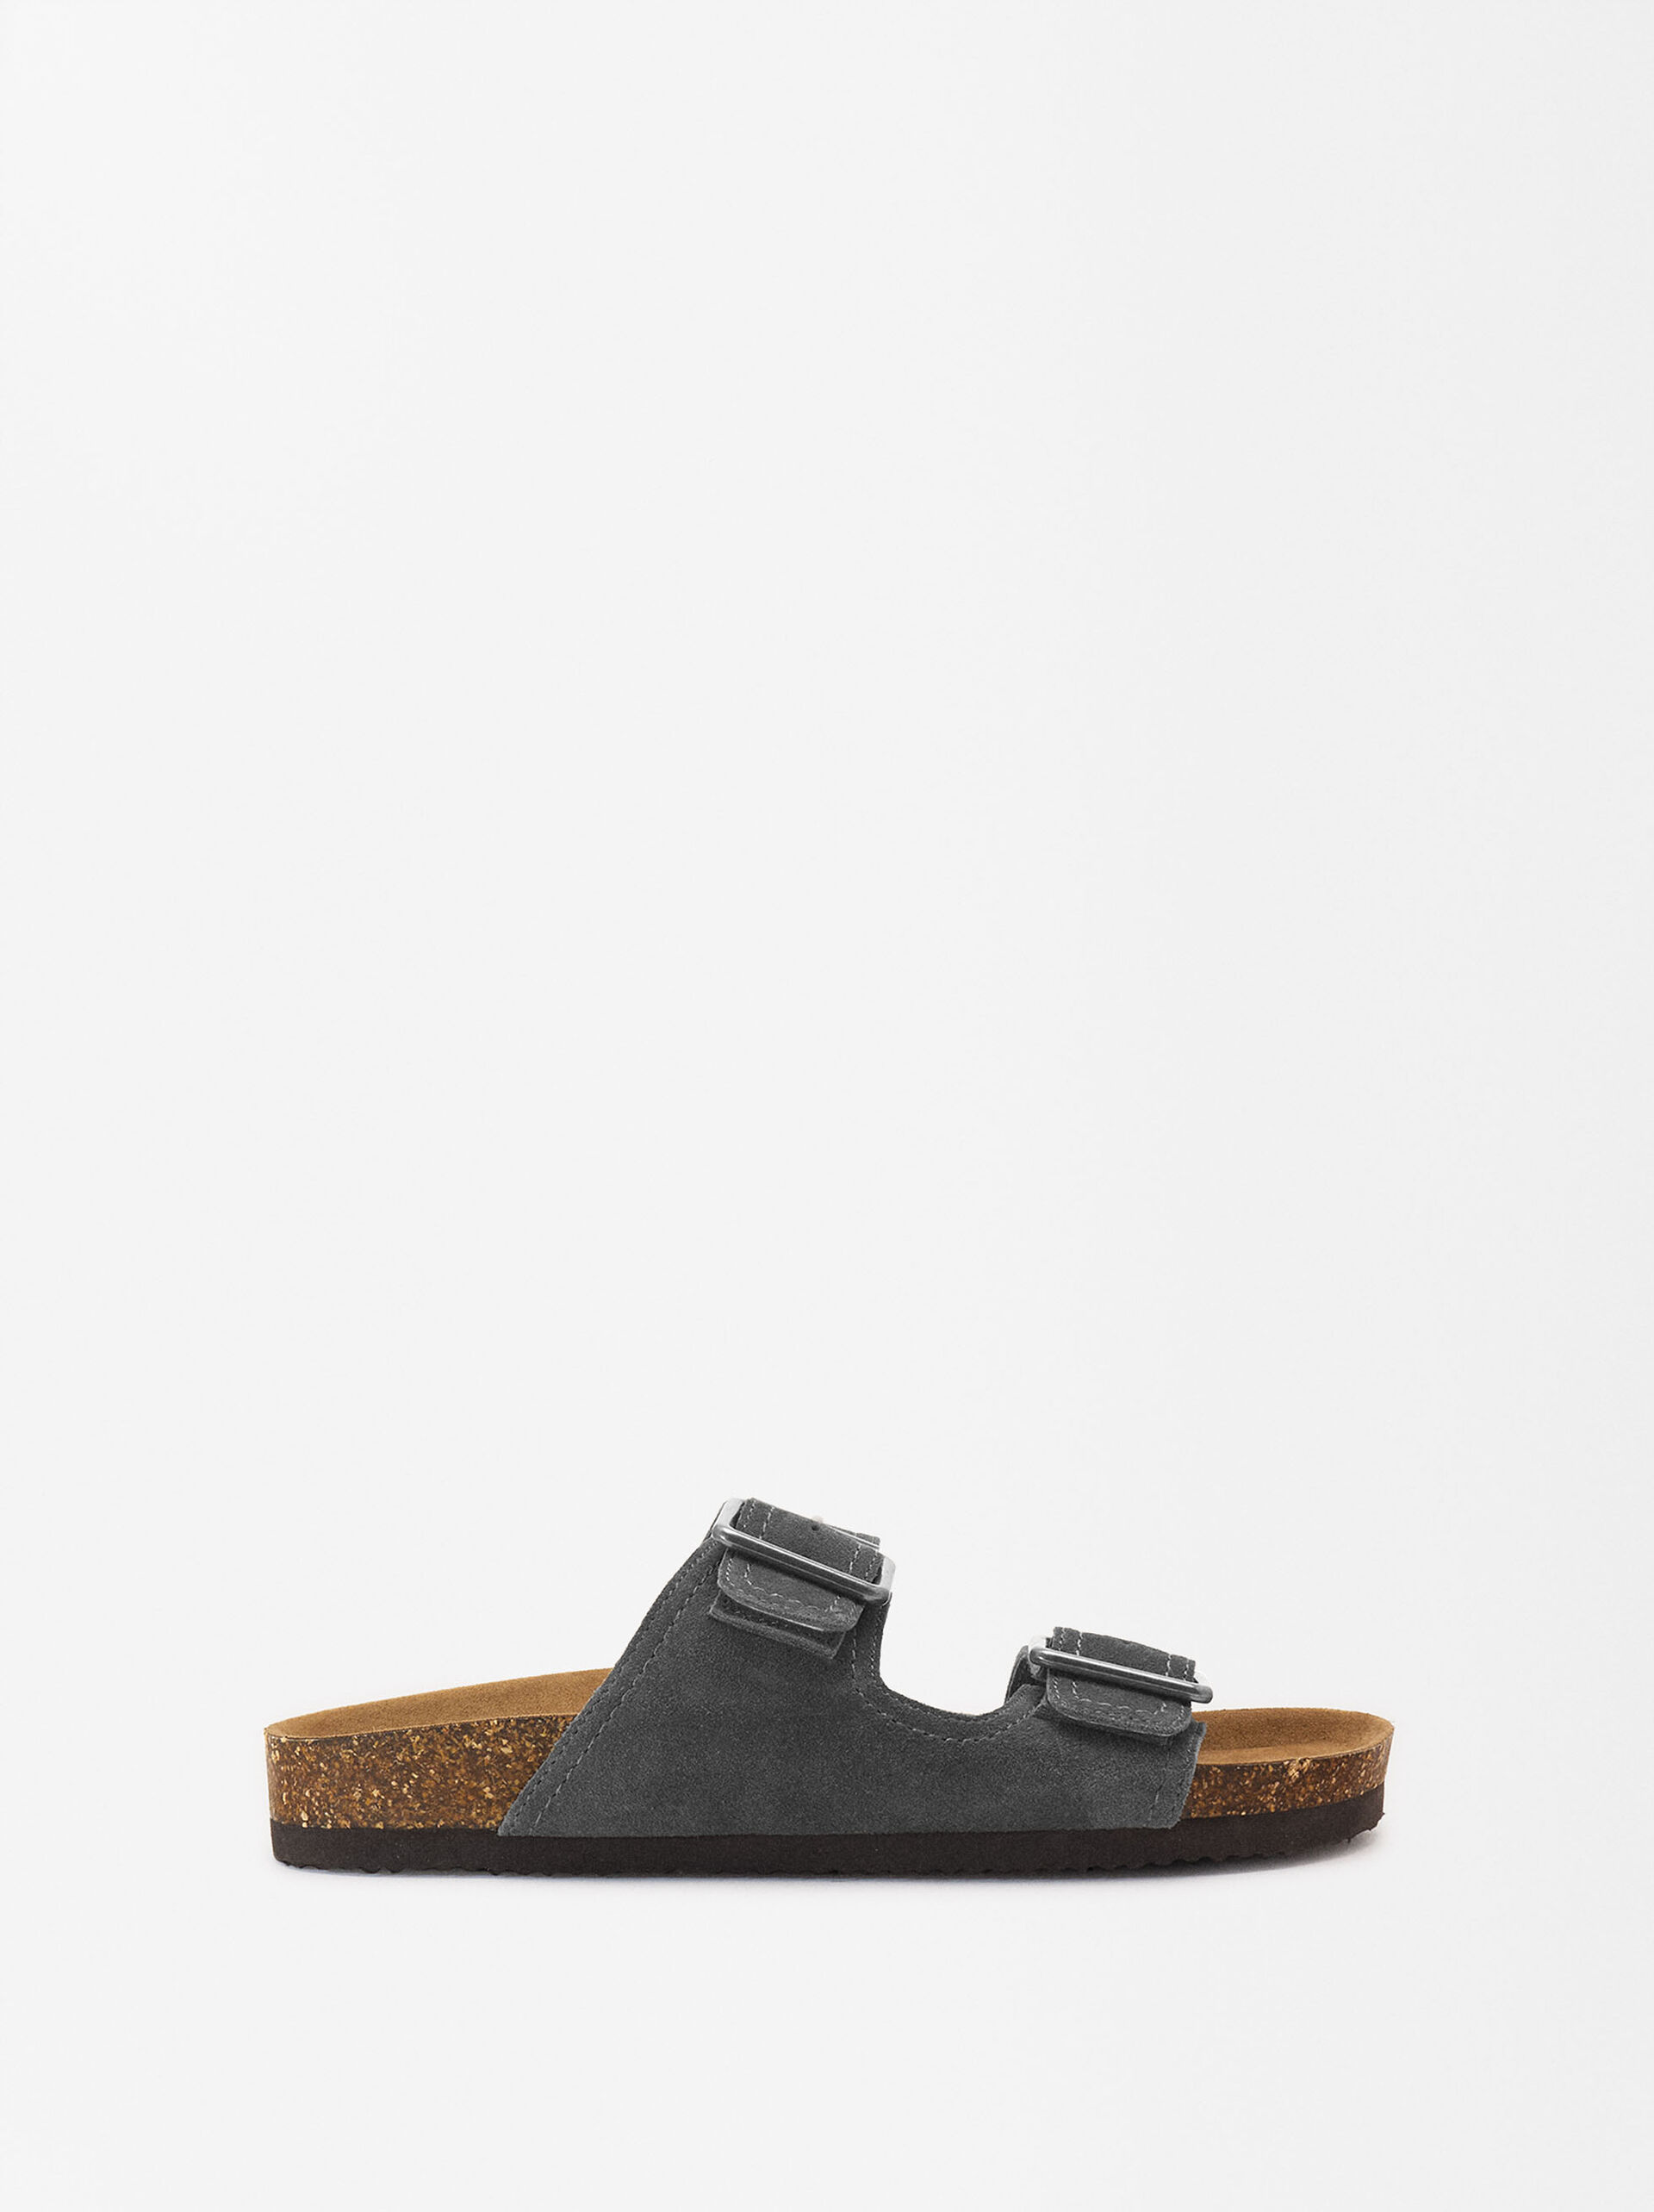 Sandals With Leather Buckles image number 0.0